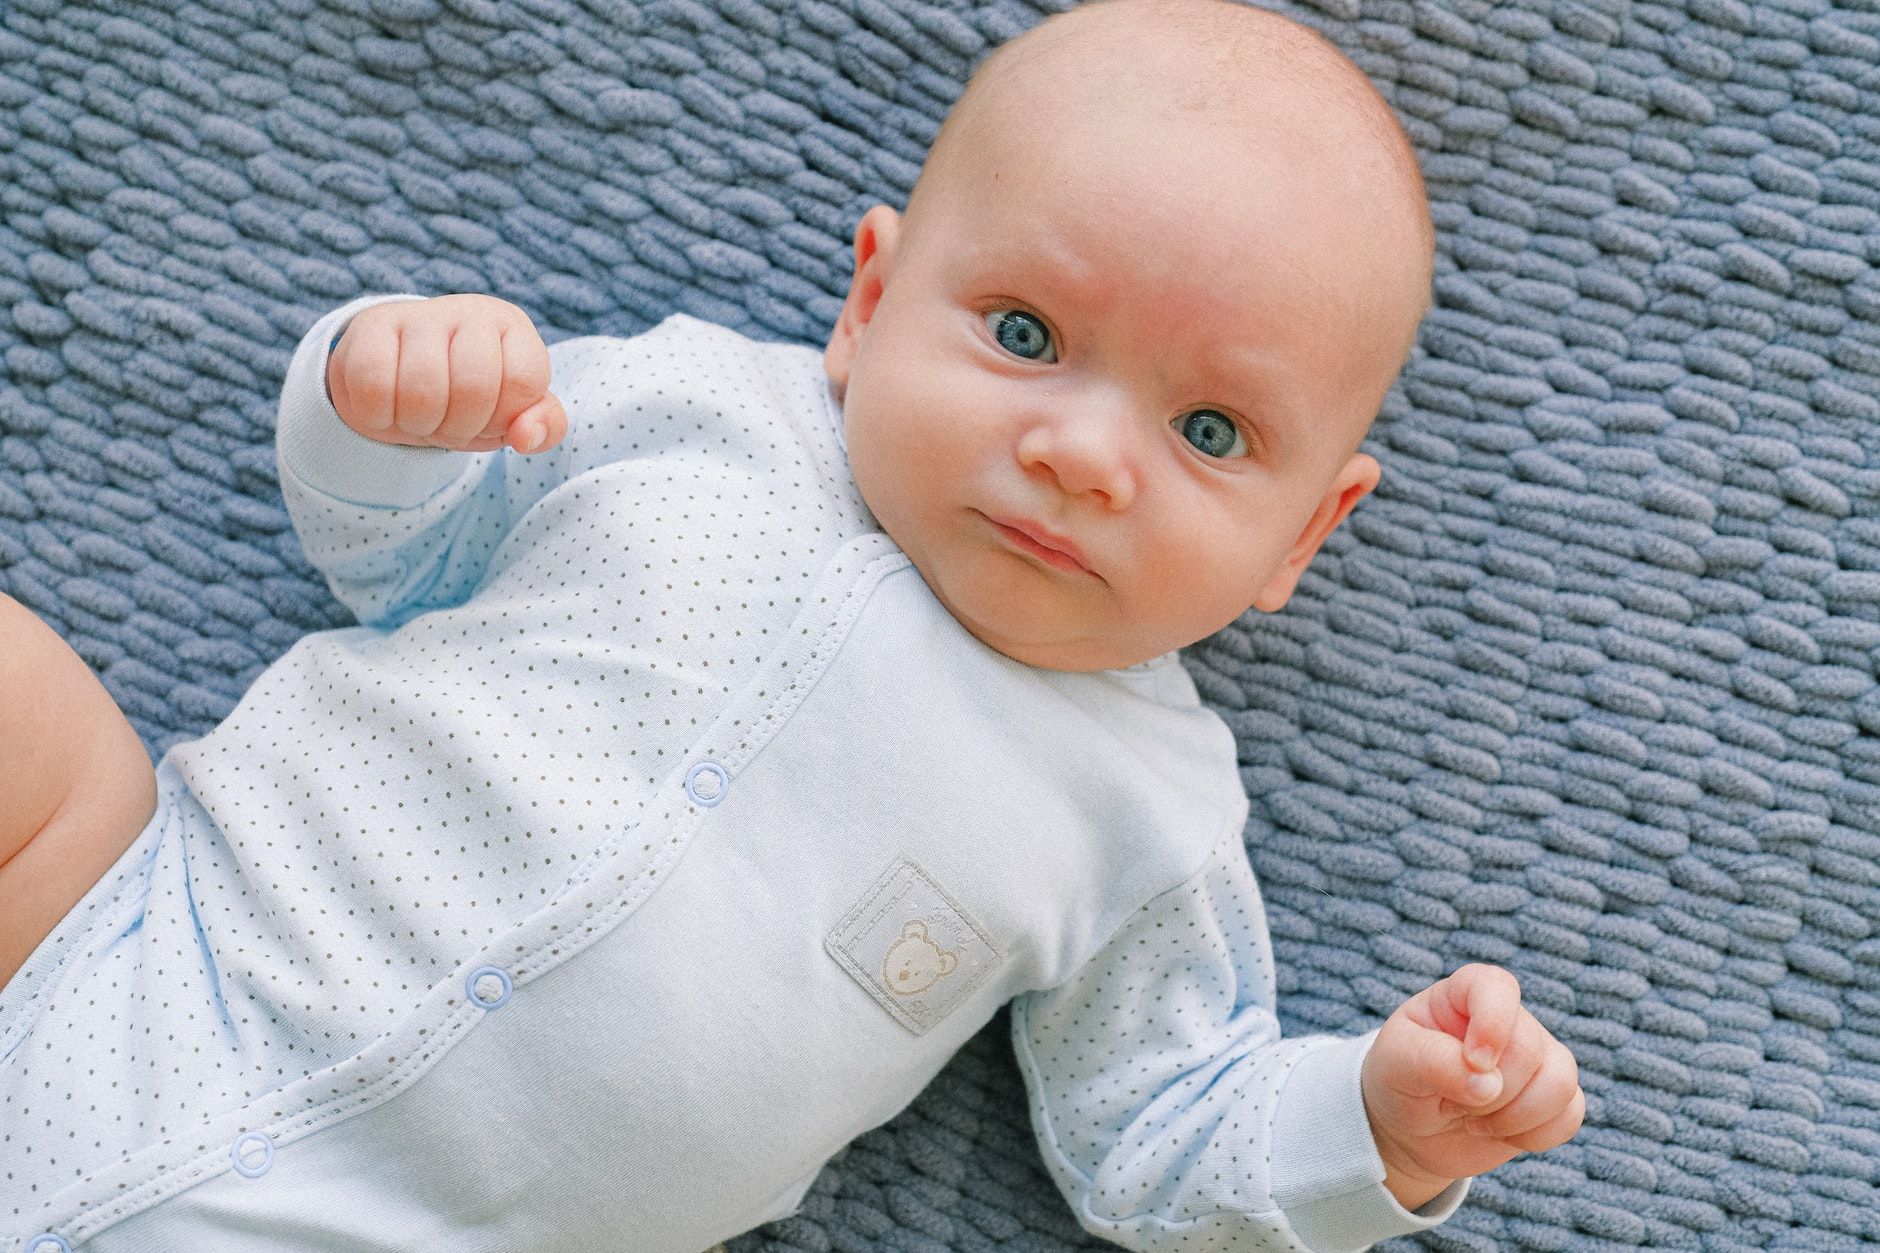 When Babies' Eye Color Changes